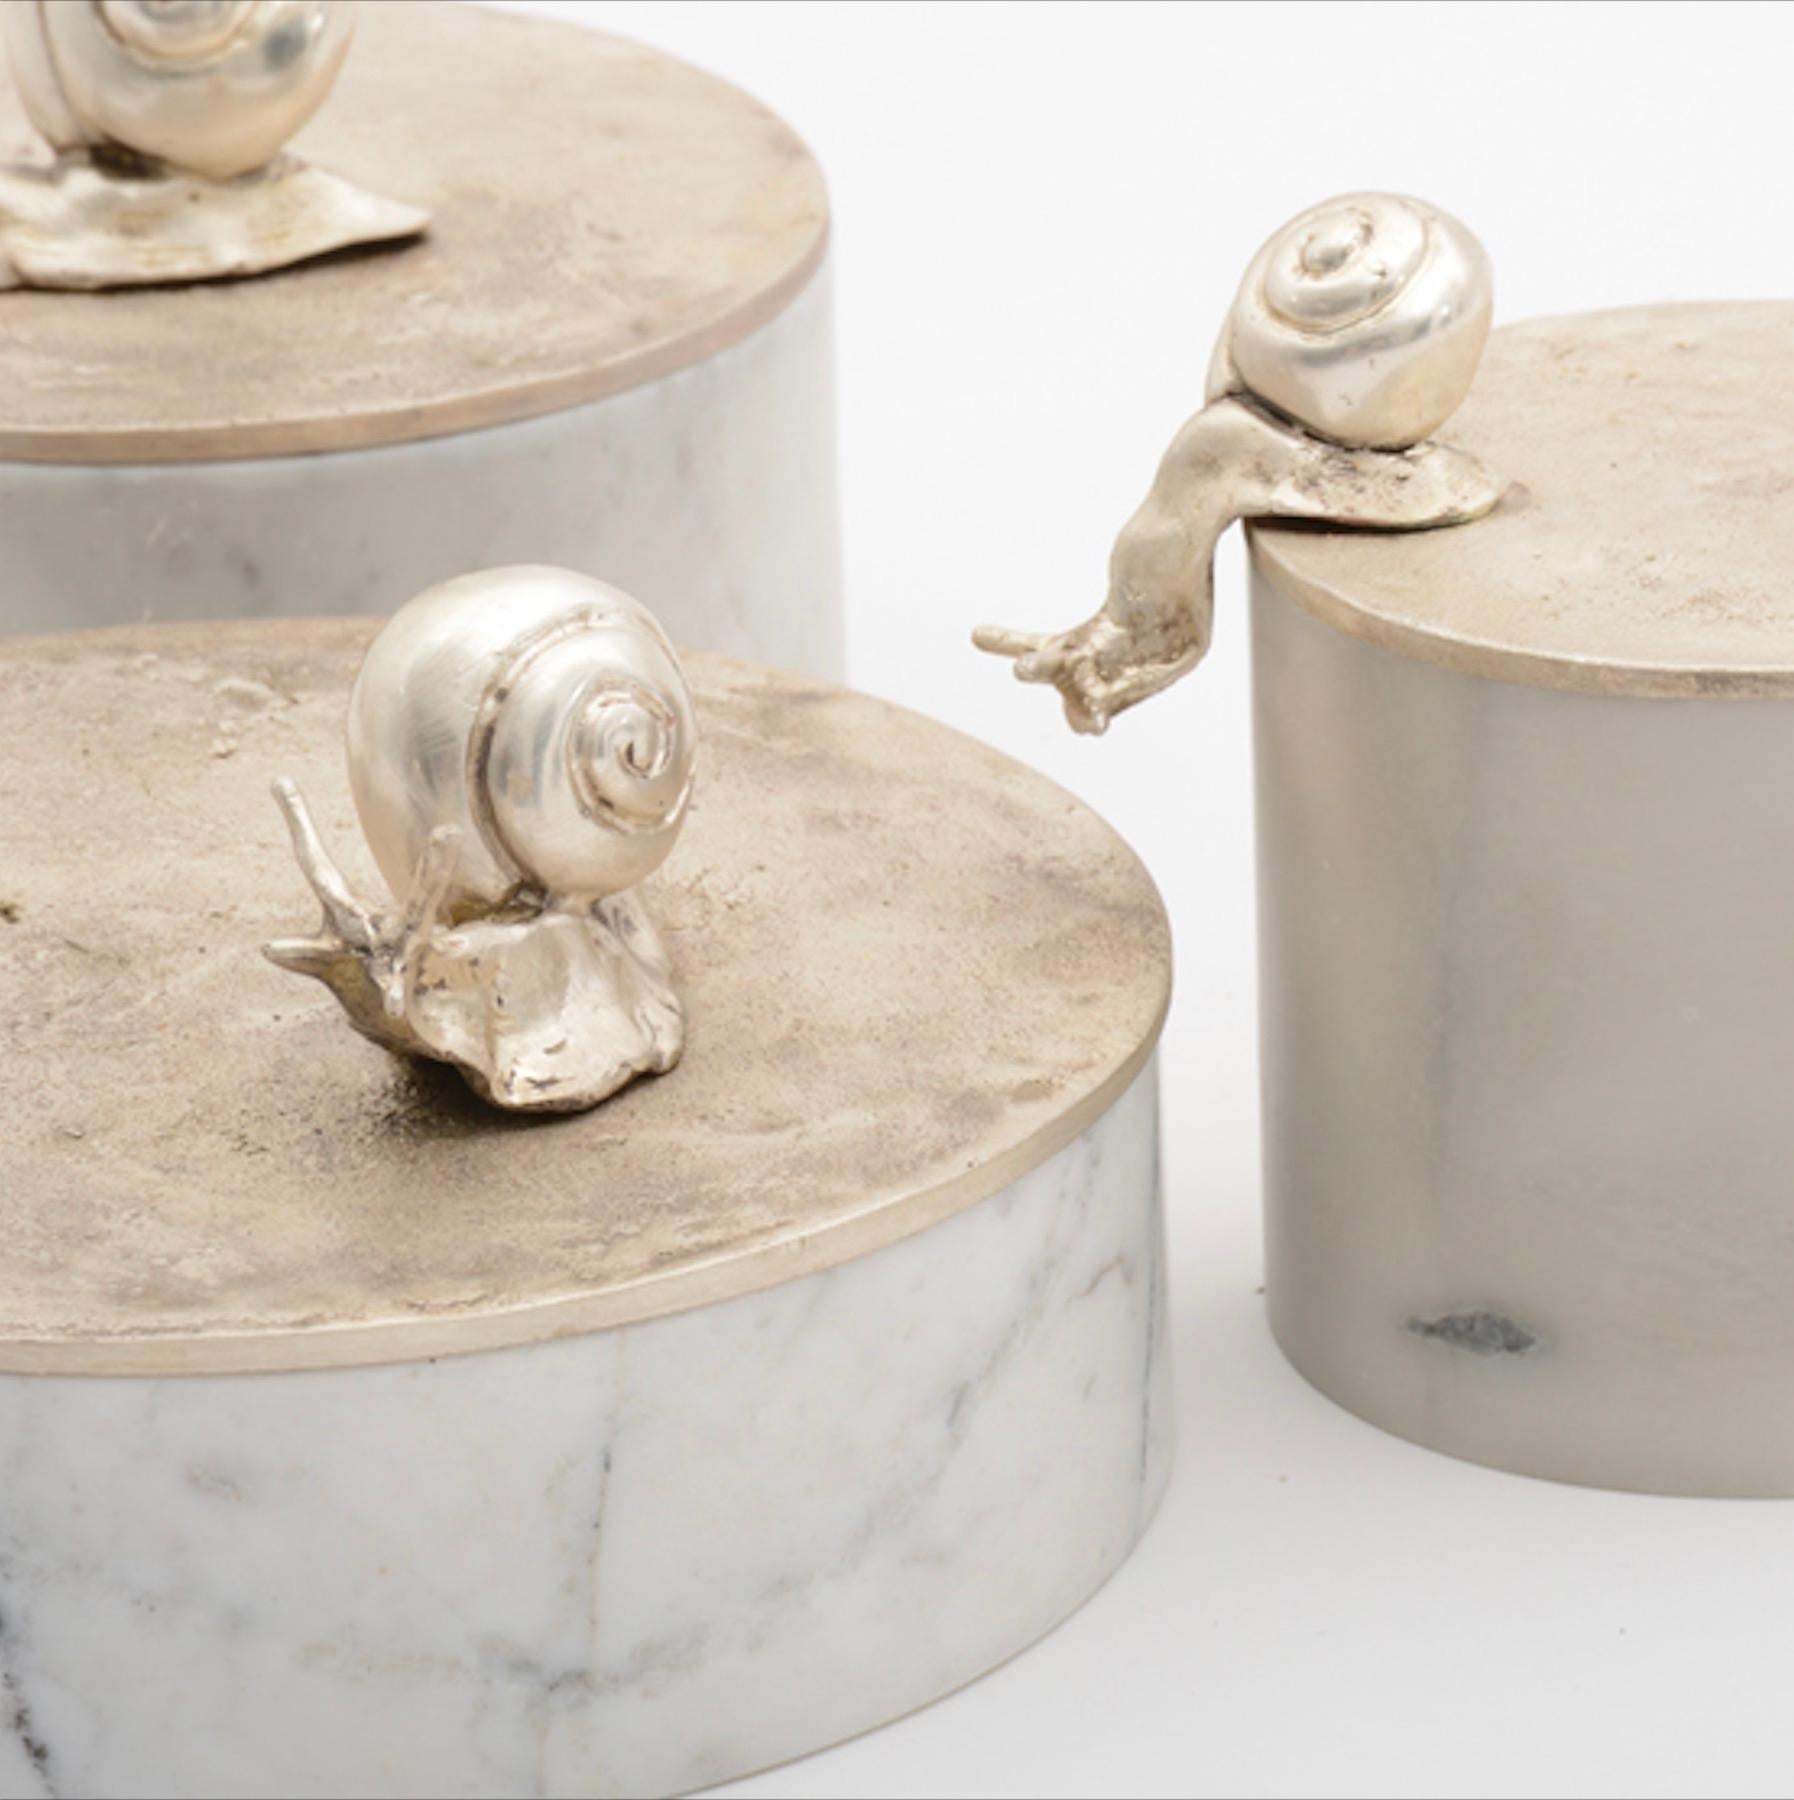 Available now at the Elan Atelier NY Showroom and ready to ship!

The sculptural Caracol keepsake box with hand carved base in white marble, and matte silver bronze top with two snails. An elegant vide-poche or jewelry box.

This listing is for the